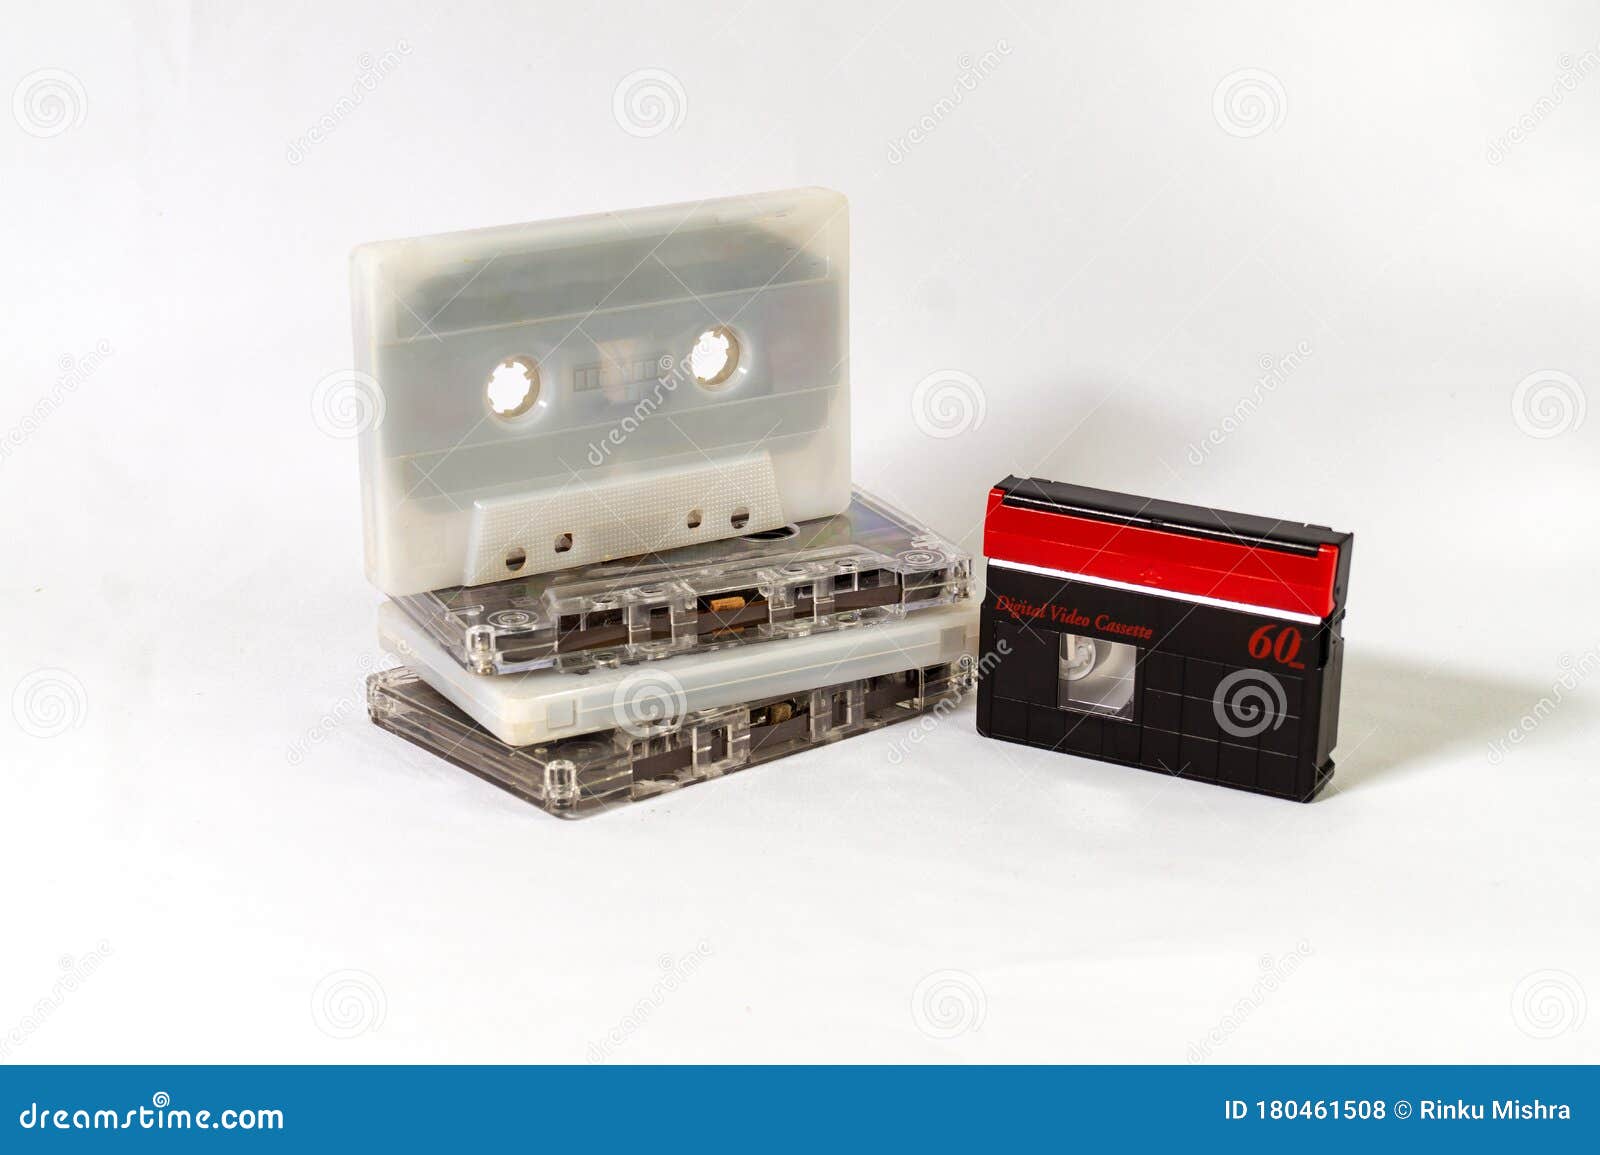 Collection of Outdated Digital Audio and Video Cassette with